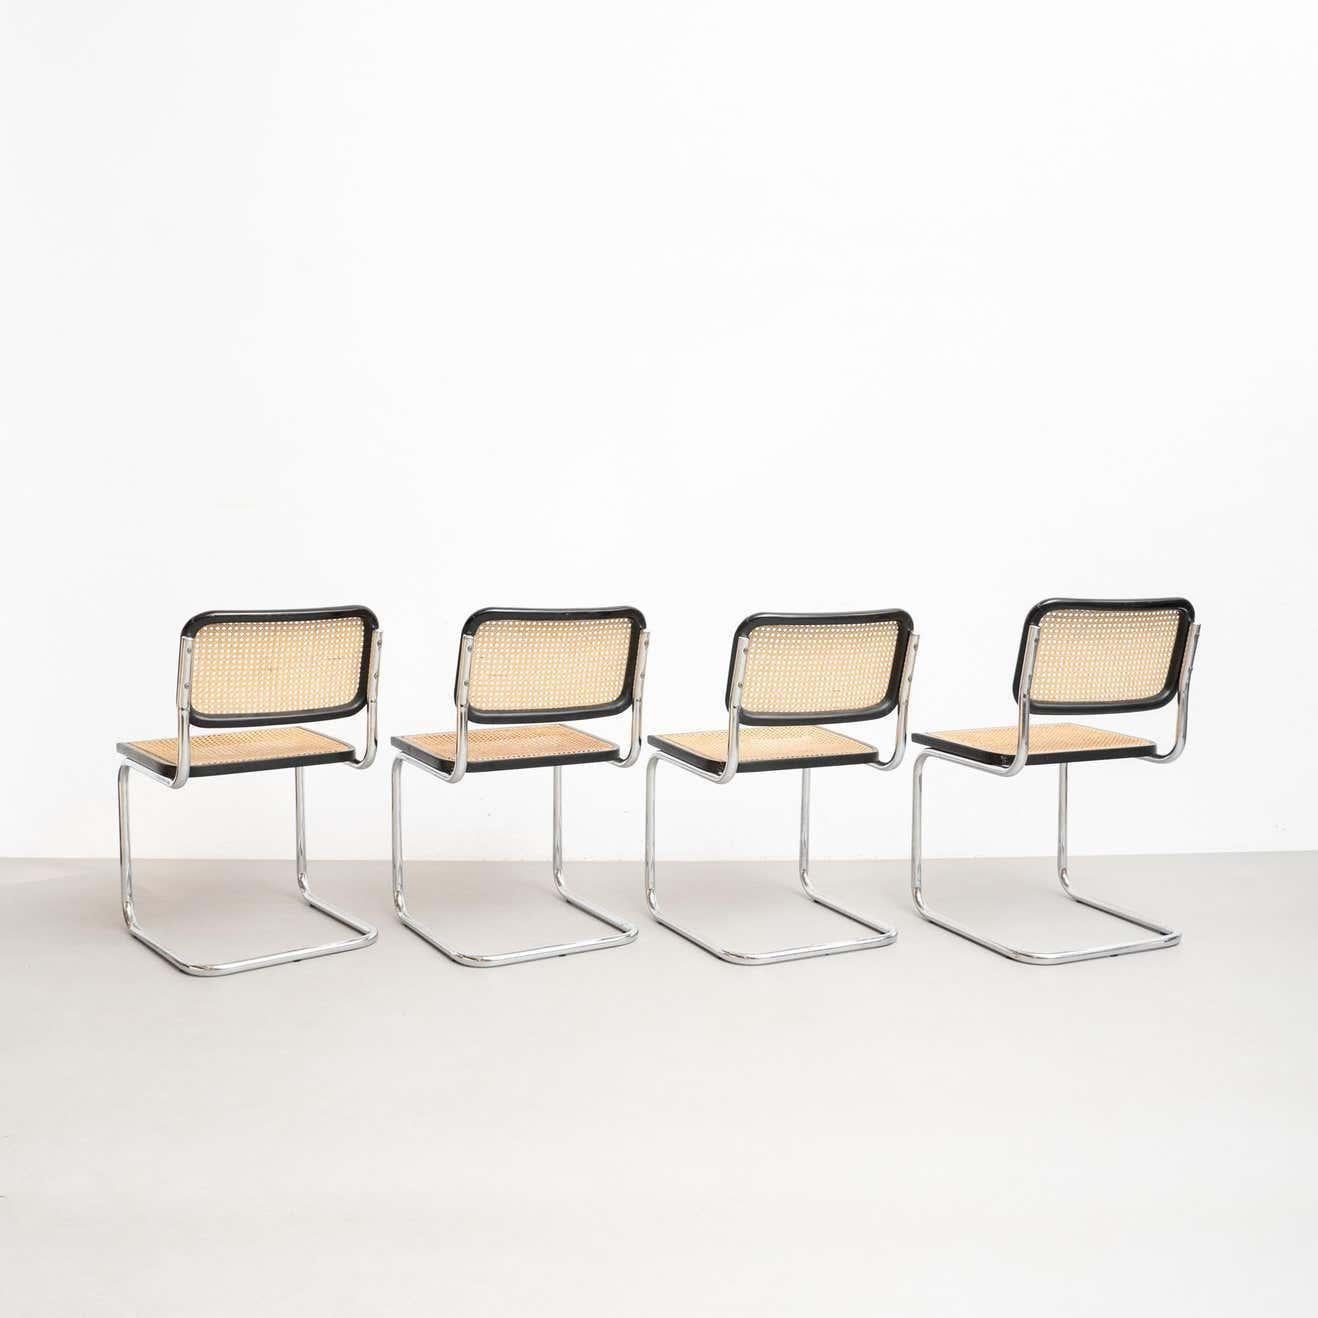 Mid-20th Century Set of 4 Marcel Breuer Cesca Metal and Wood Mid-Century Modern Chairs, c 1960 For Sale